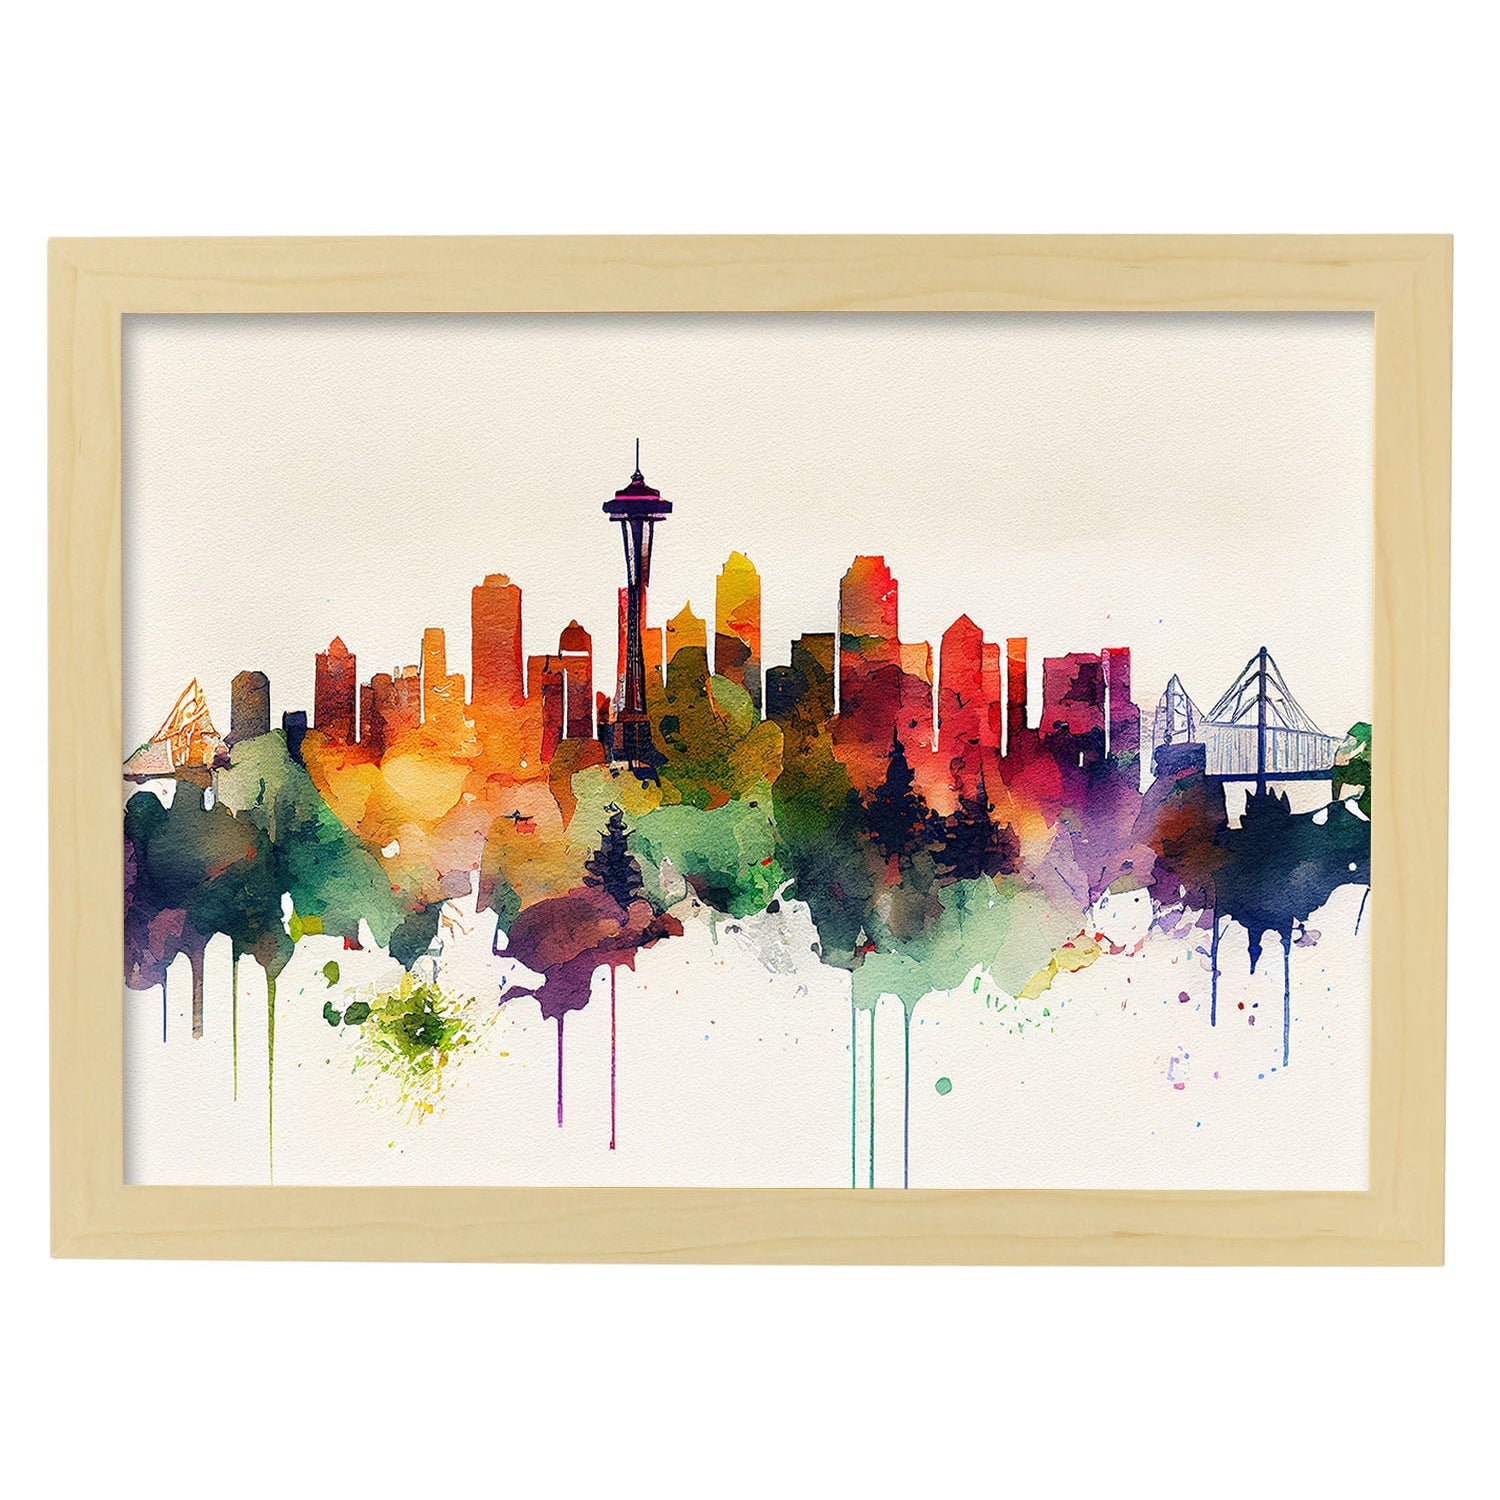 Nacnic watercolor of a skyline of the city of Seattle. Aesthetic Wall Art Prints for Bedroom or Living Room Design.-Artwork-Nacnic-A4-Marco Madera Clara-Nacnic Estudio SL